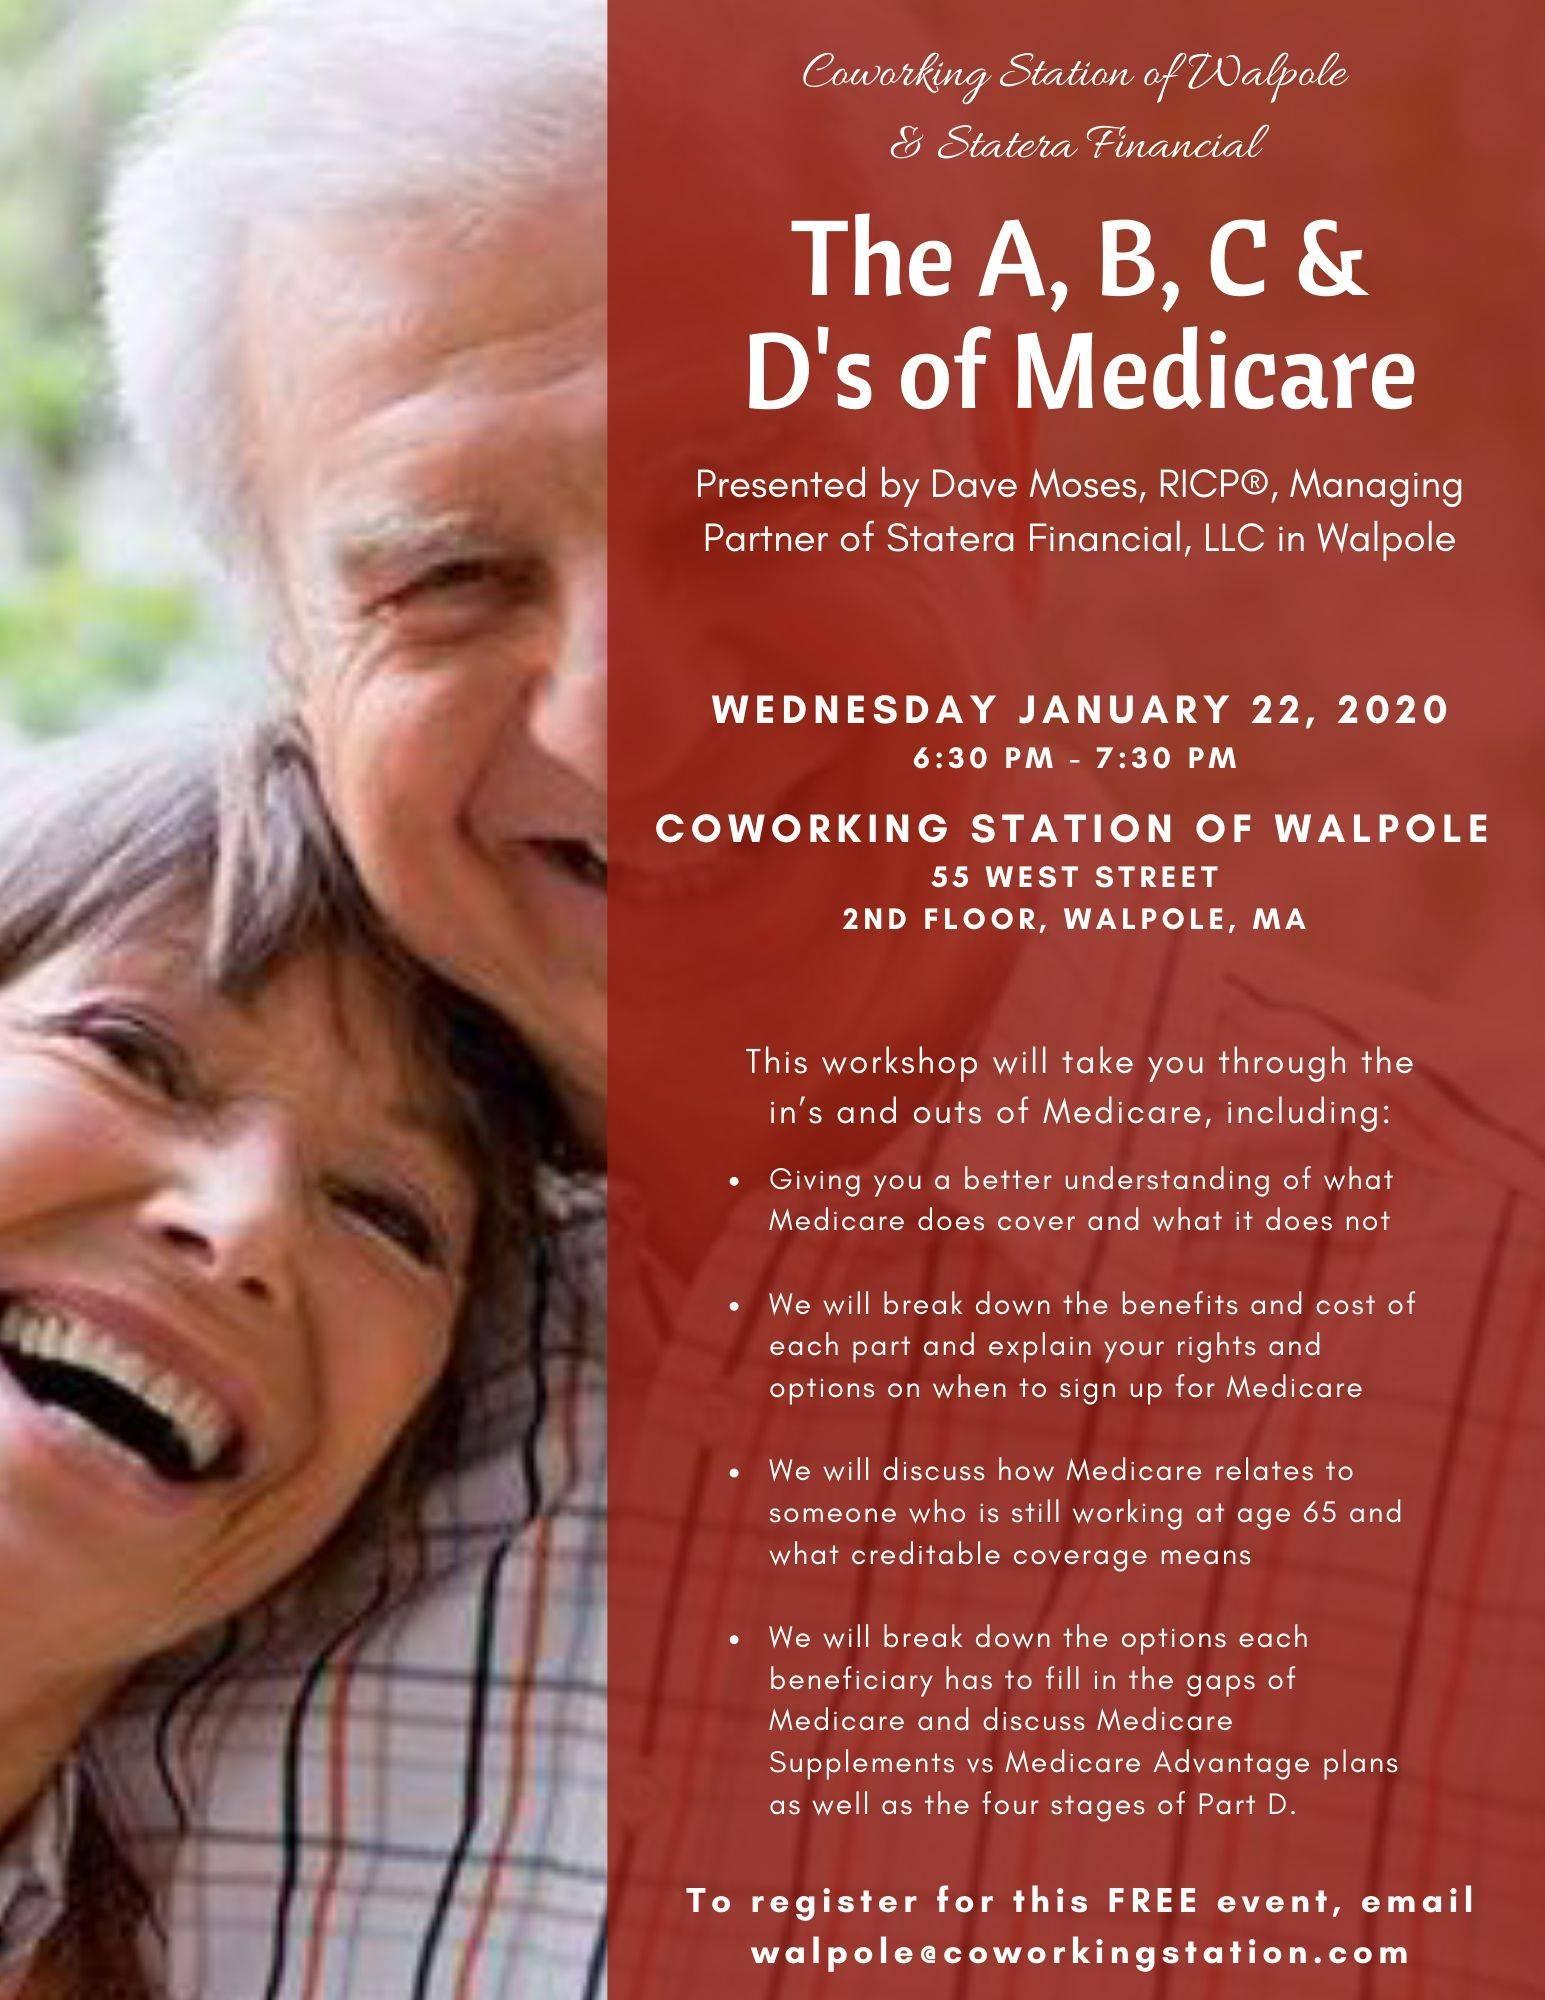 The A,B,C & D's of Medicare